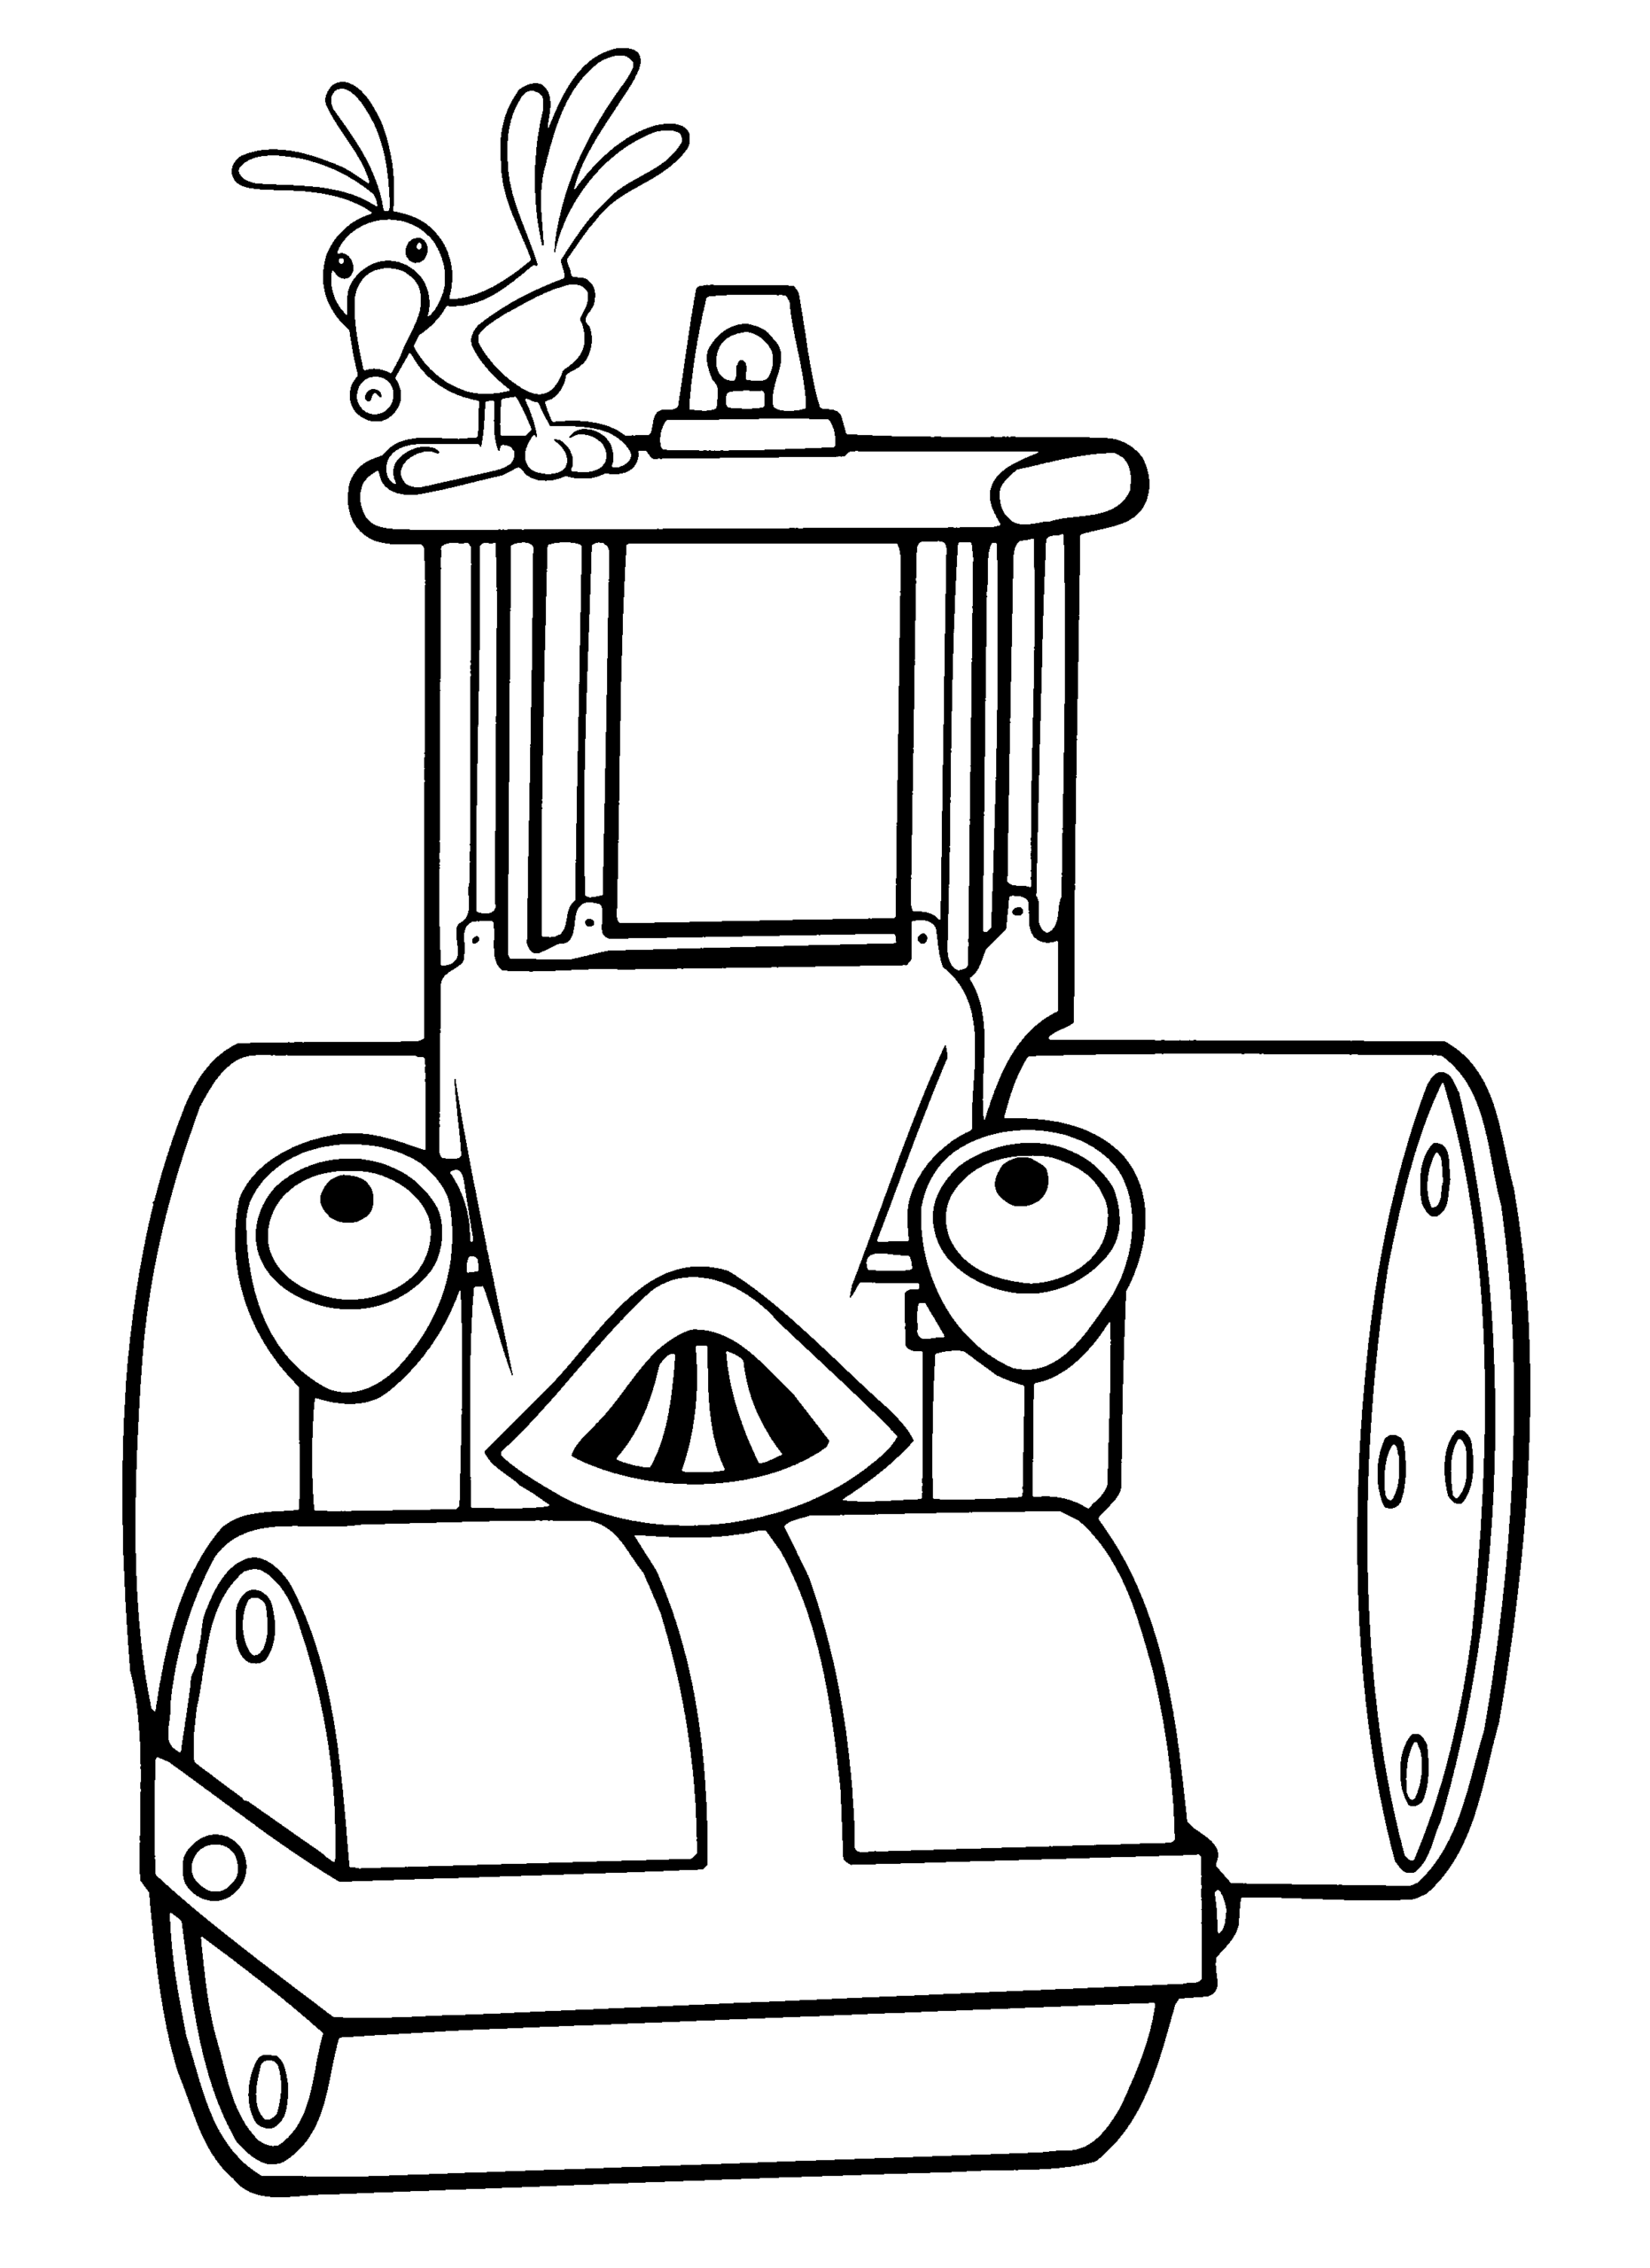 Bob the Builder Coloring Pages TV Film bob the builder 71 Printable 2020 01093 Coloring4free